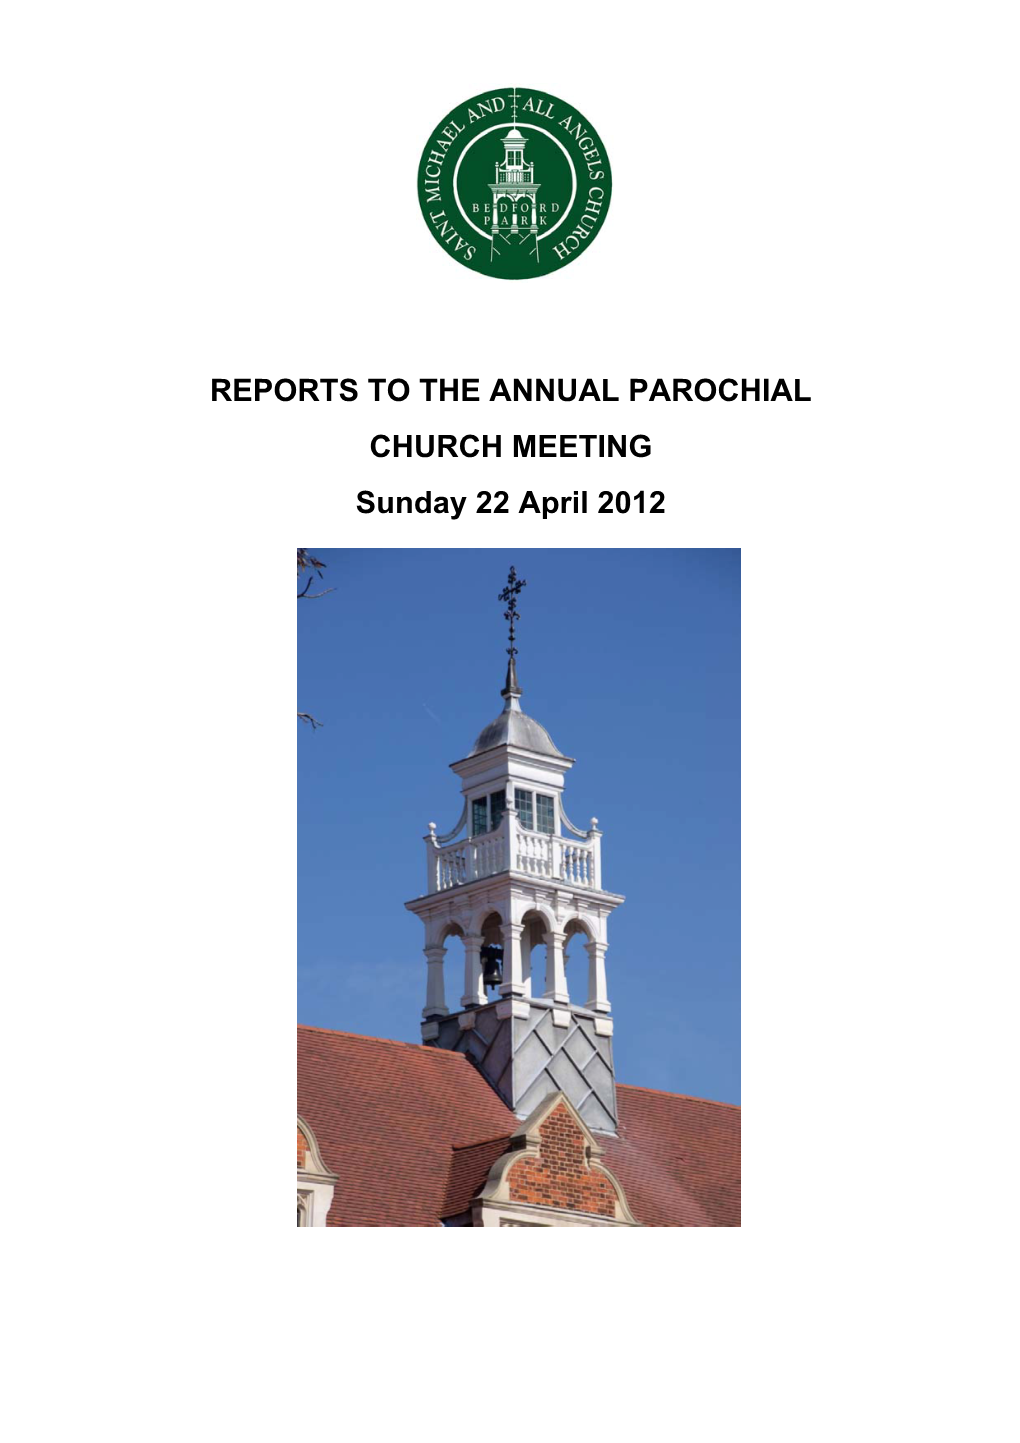 REPORTS to the ANNUAL PAROCHIAL CHURCH MEETING Sunday 22 April 2012